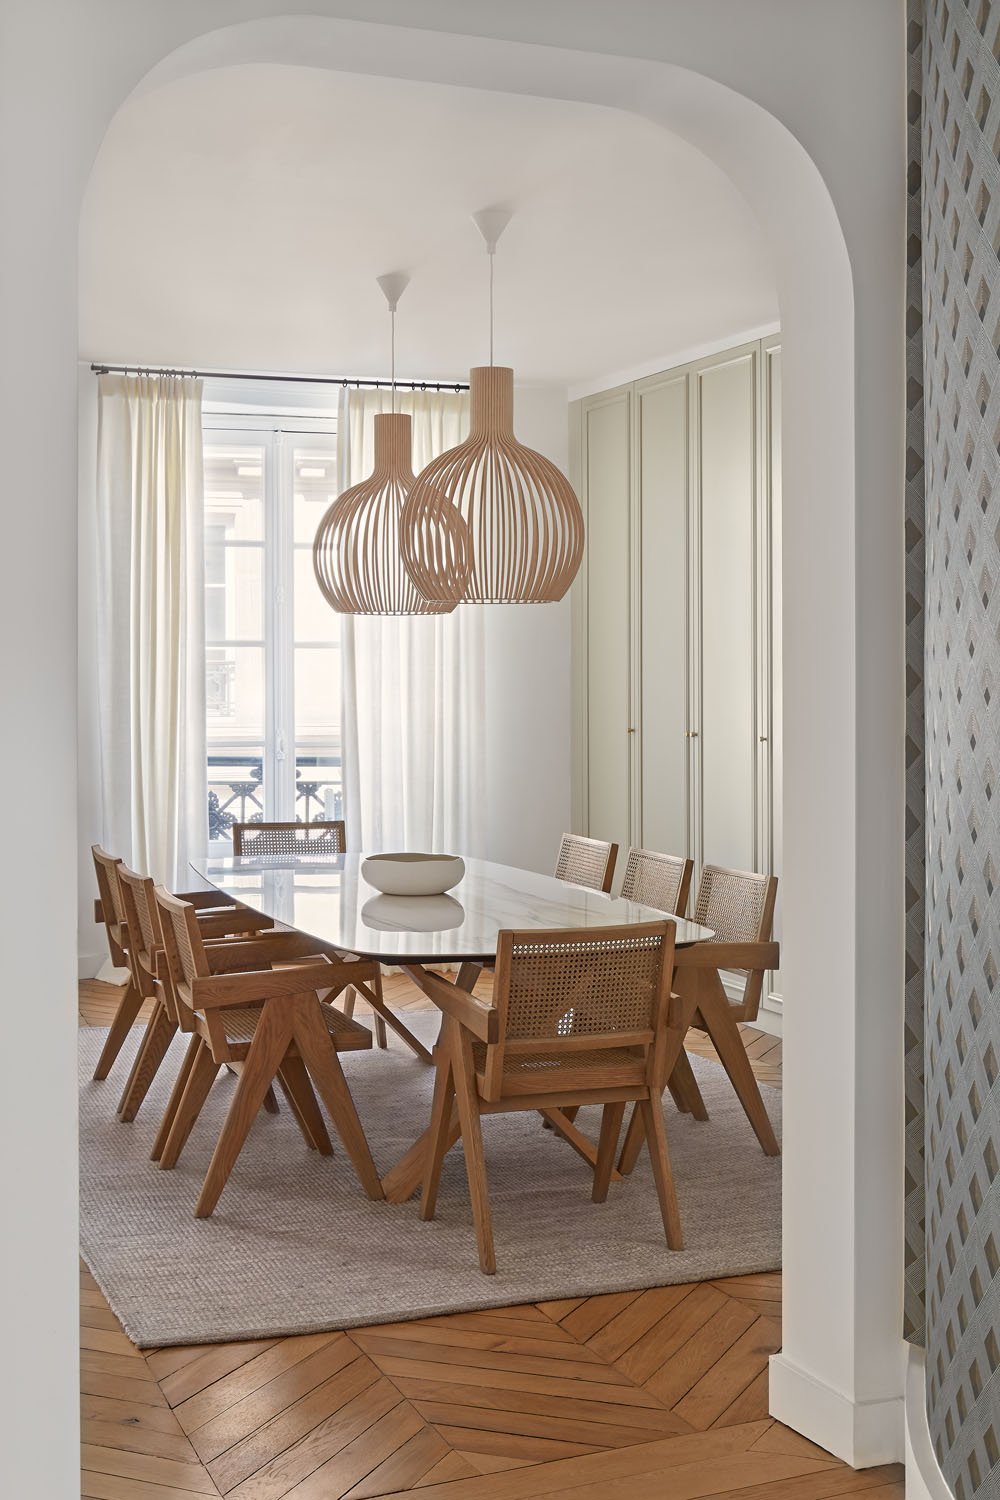 lichelle-silvestry-interior-paris-dining-table-wooden-chairs.jpg